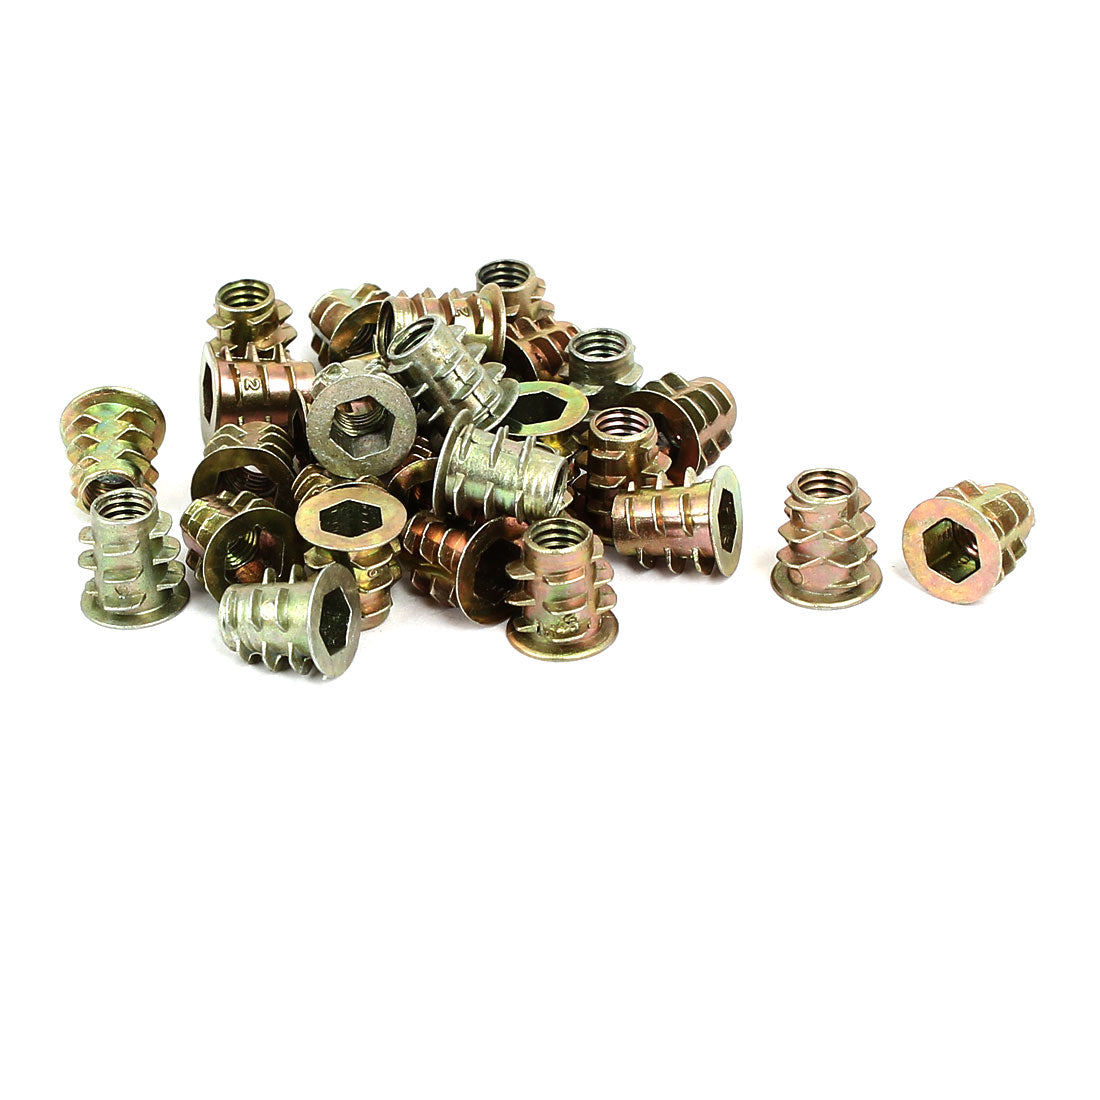 uxcell Uxcell M5x10mm Interface Hex Socket Threaded Insert Nuts 30pcs for Wood Furniture